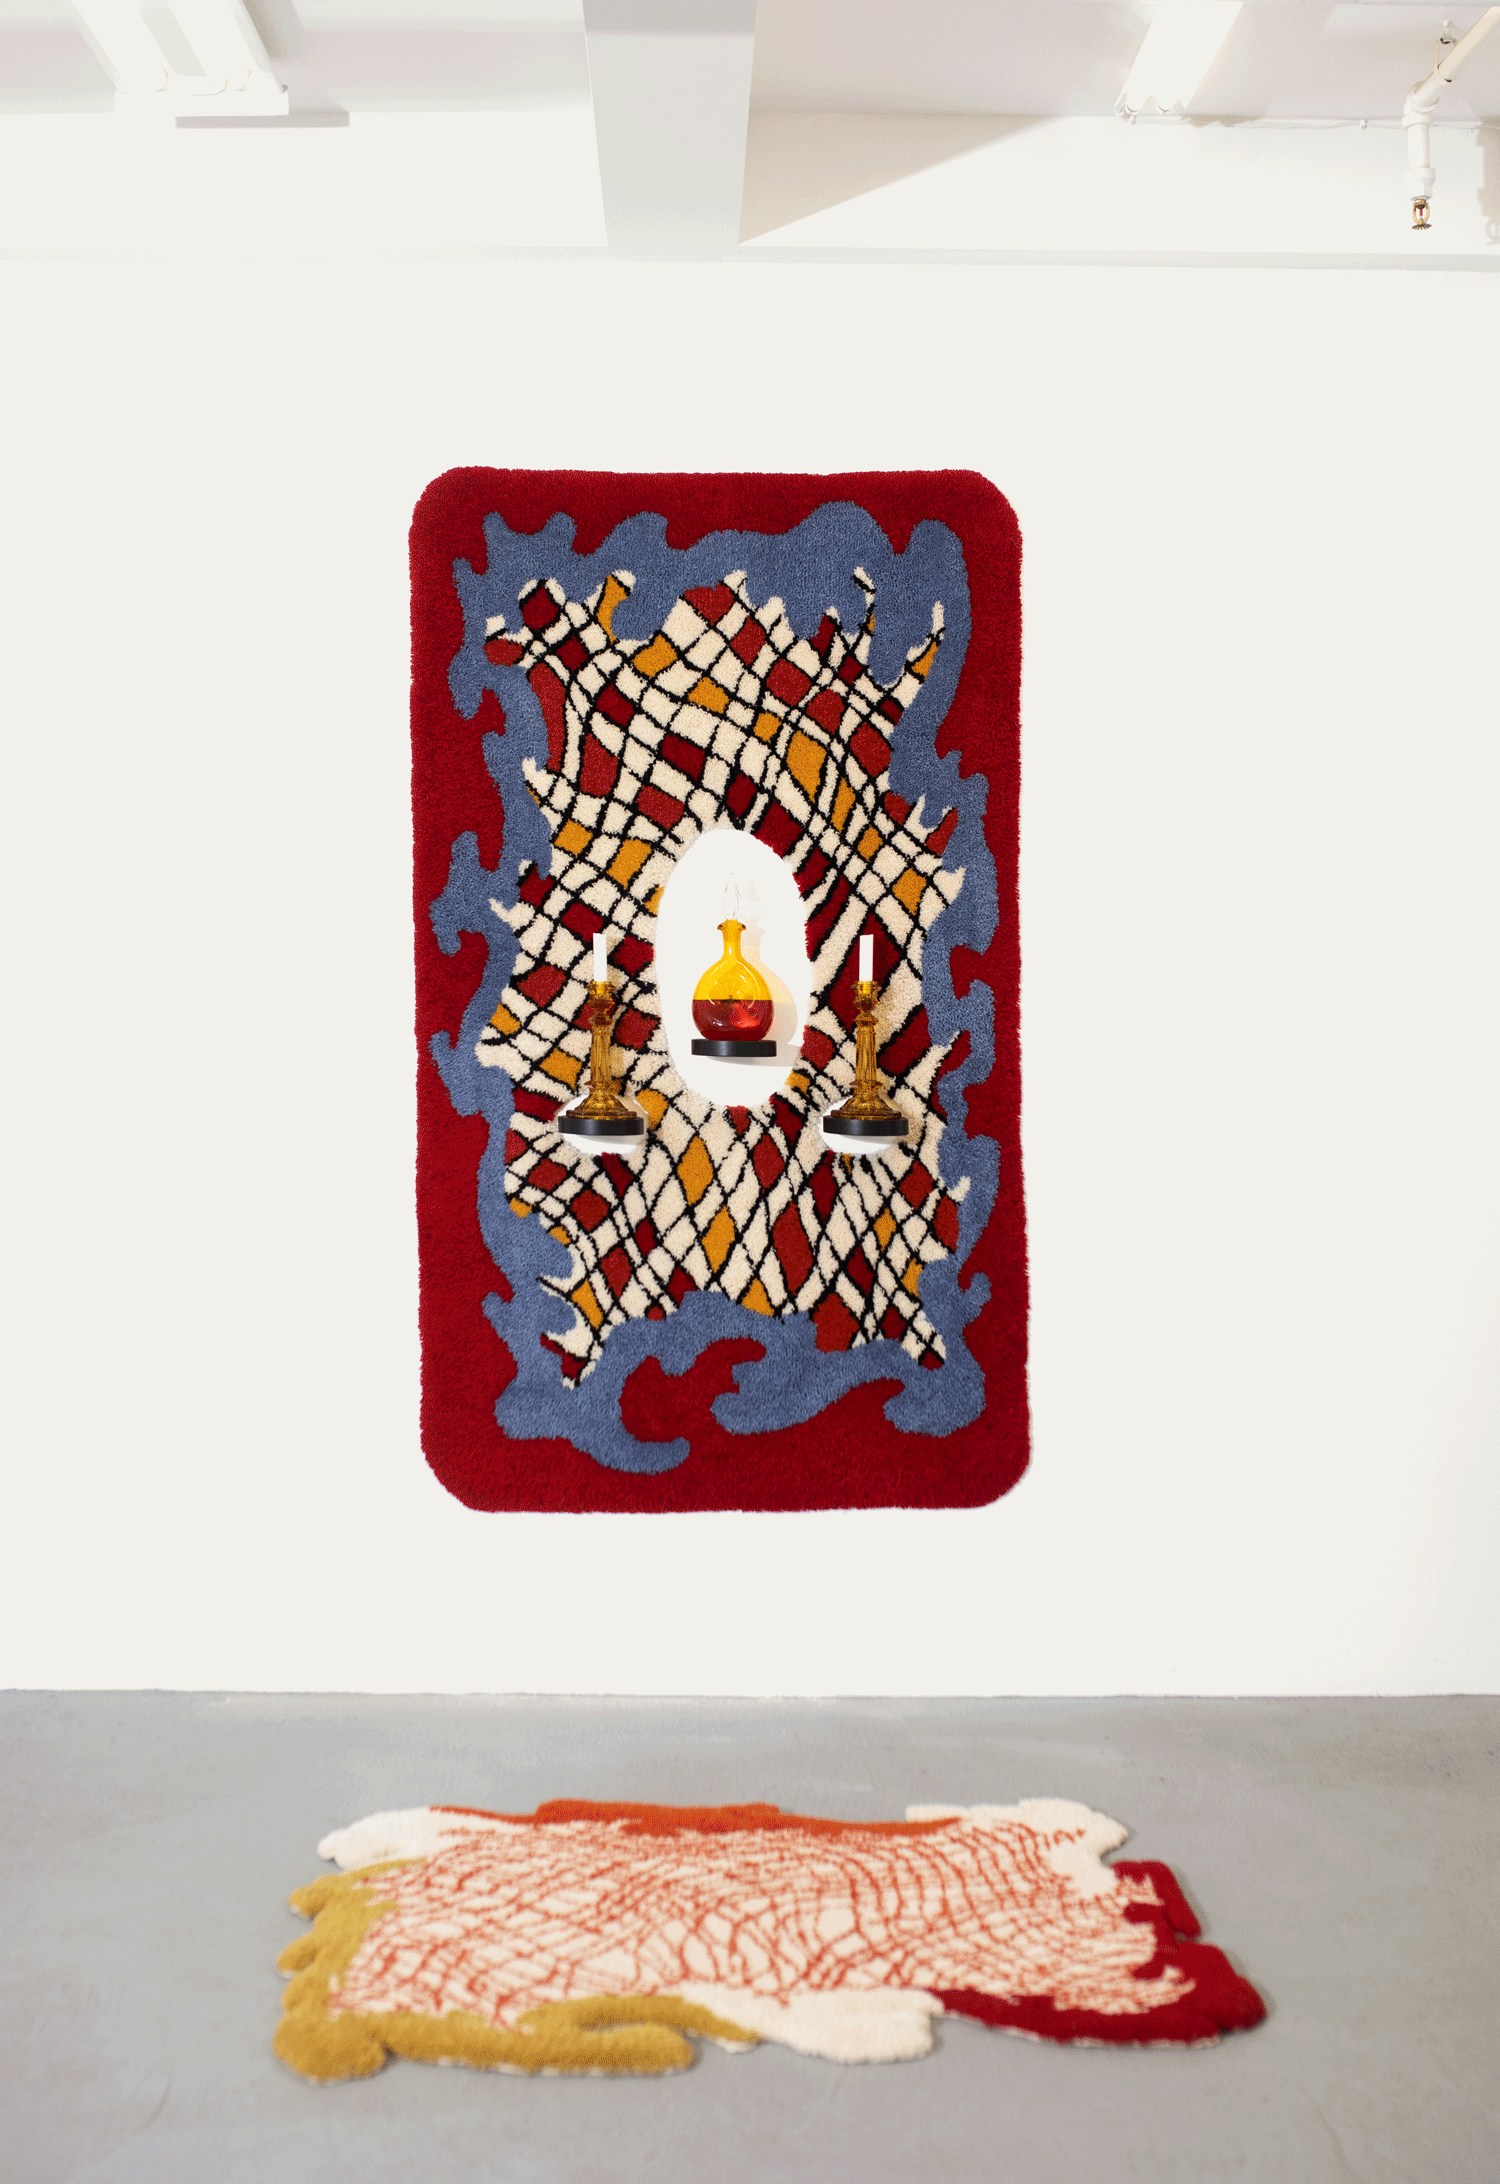 This Brooklyn-Based Creative Is Redefining the Art of Rug-Making